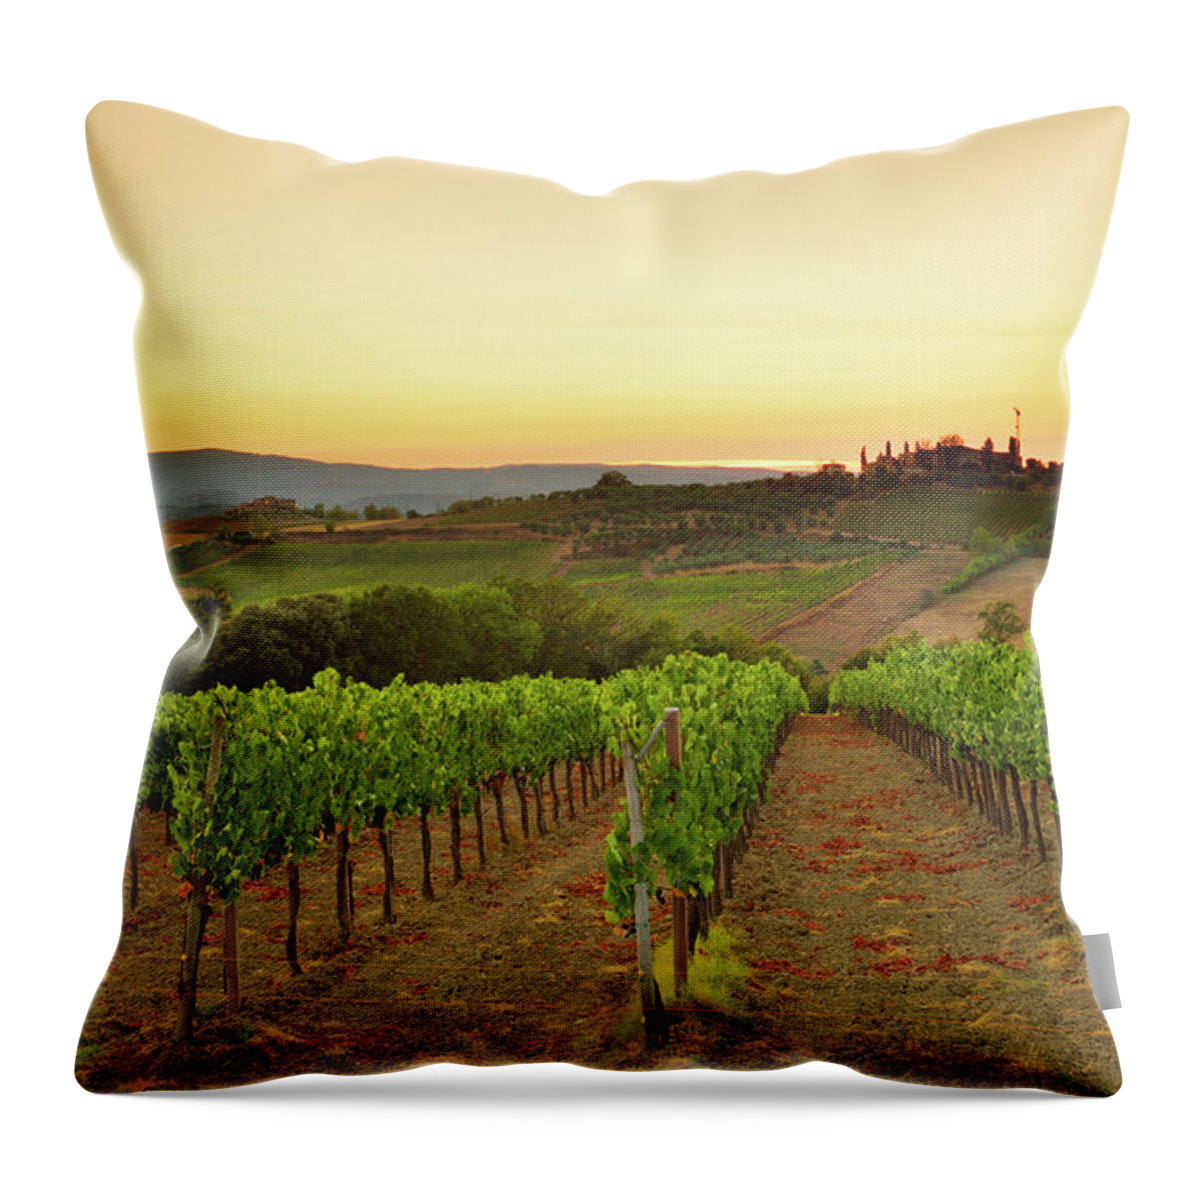 Environmental Conservation Throw Pillow featuring the photograph Sunset Over The Vineyard From Tuscany by Csondy